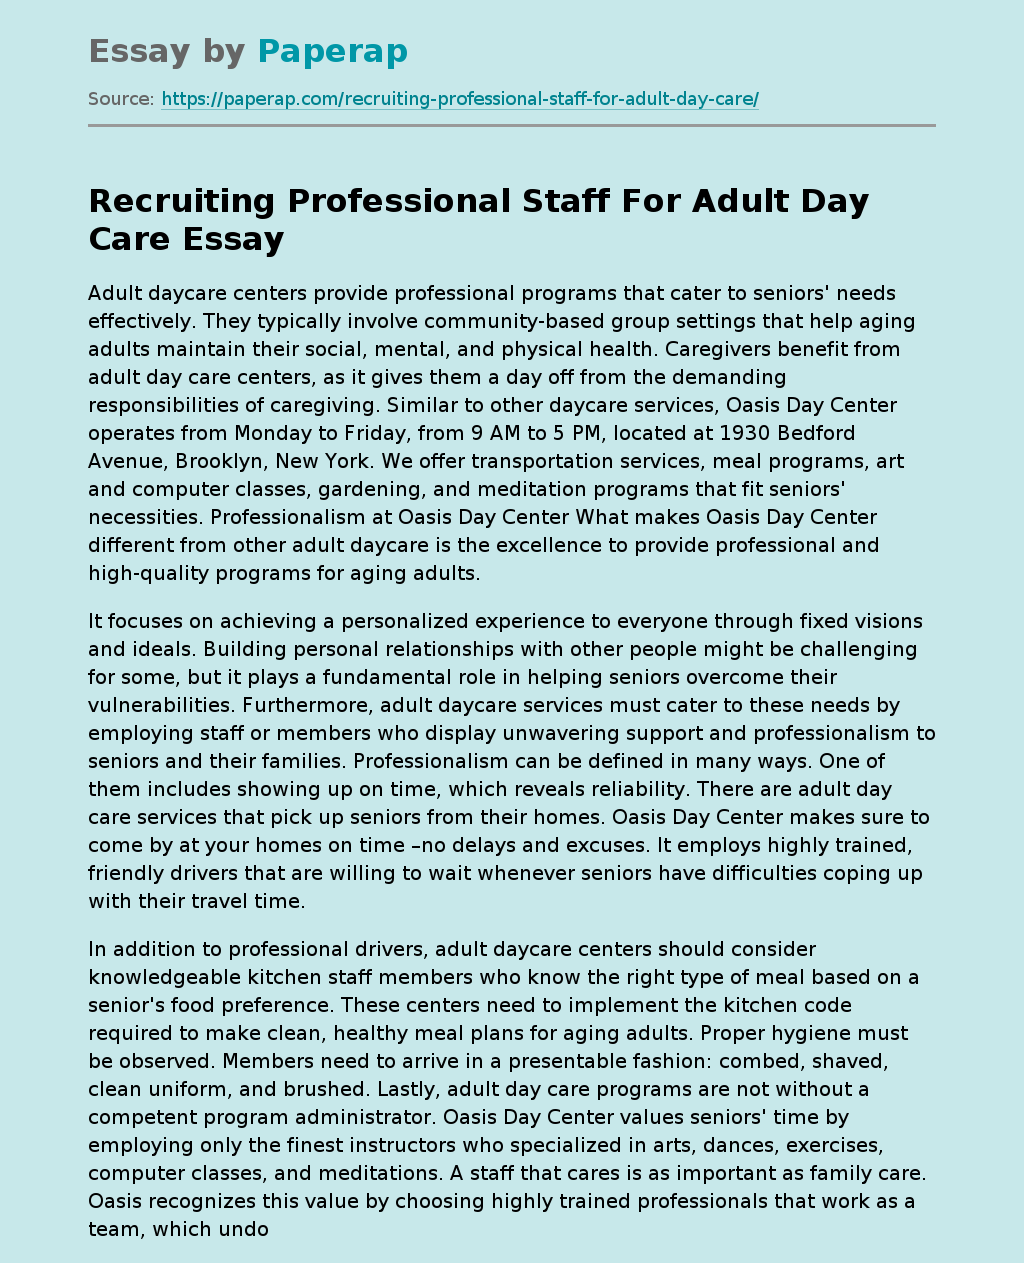 Recruiting Professional Staff For Adult Day Care